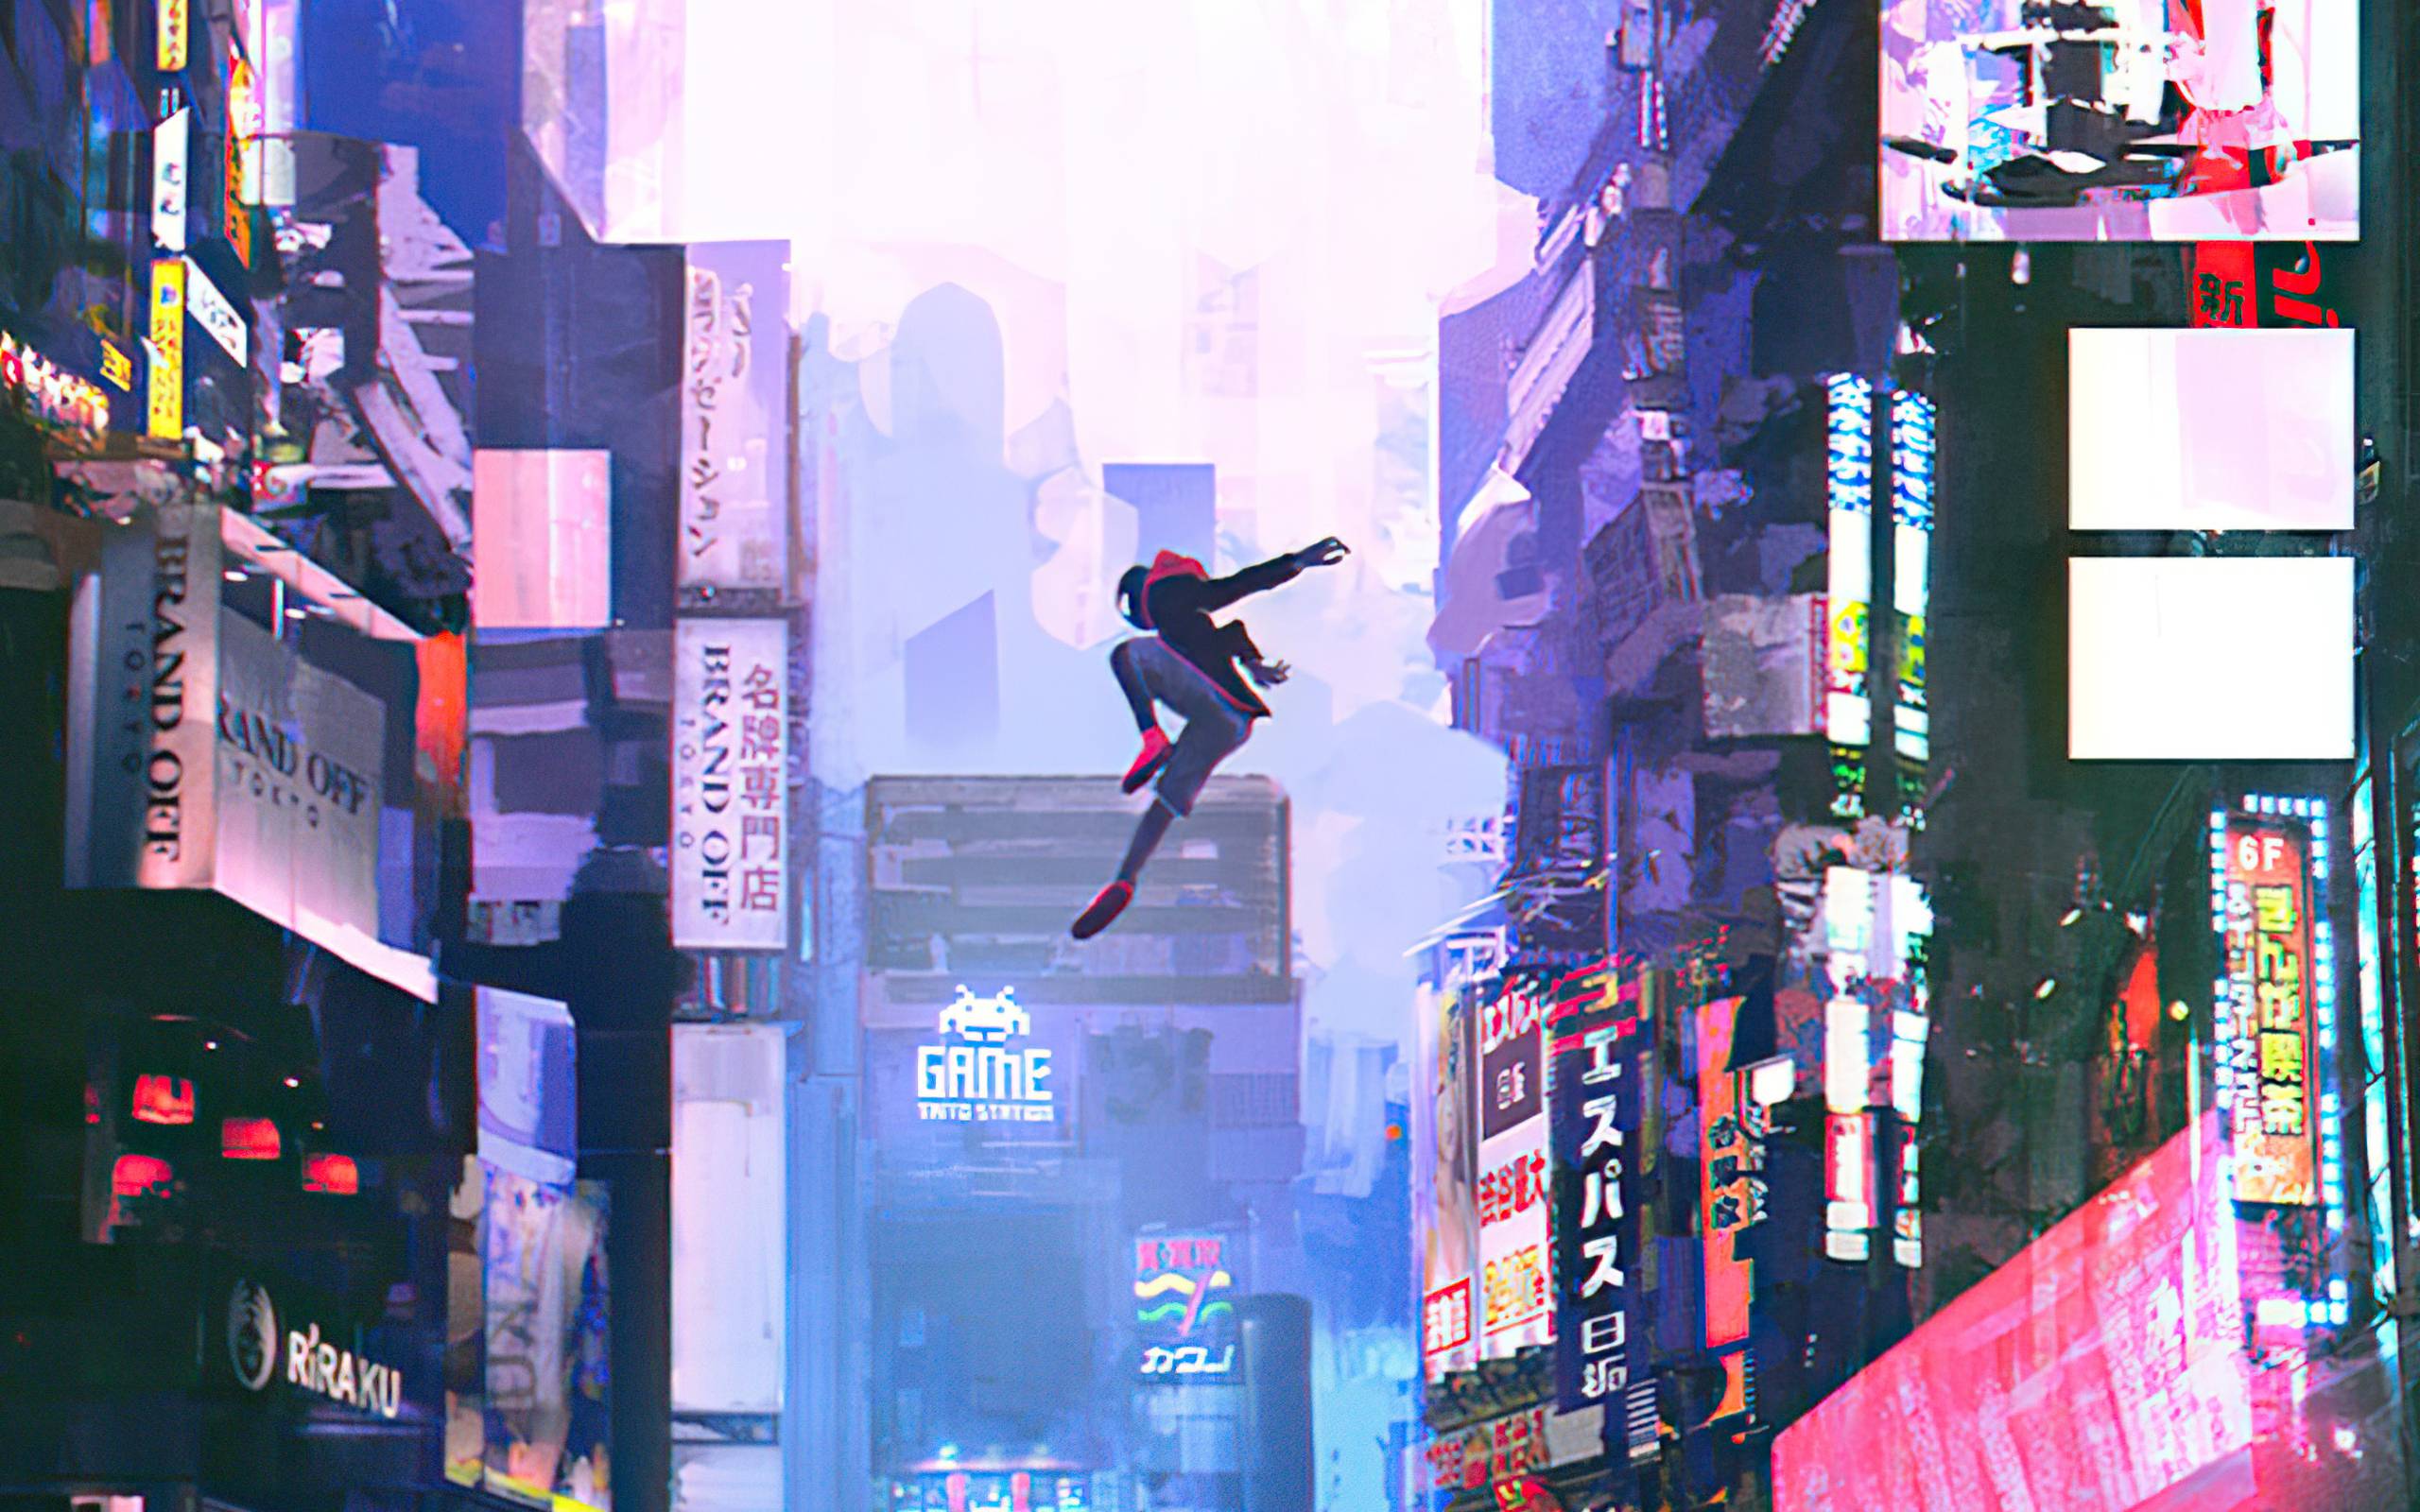 Spider-Man leaps through the air in a colorful, neon cityscape. - 2560x1600